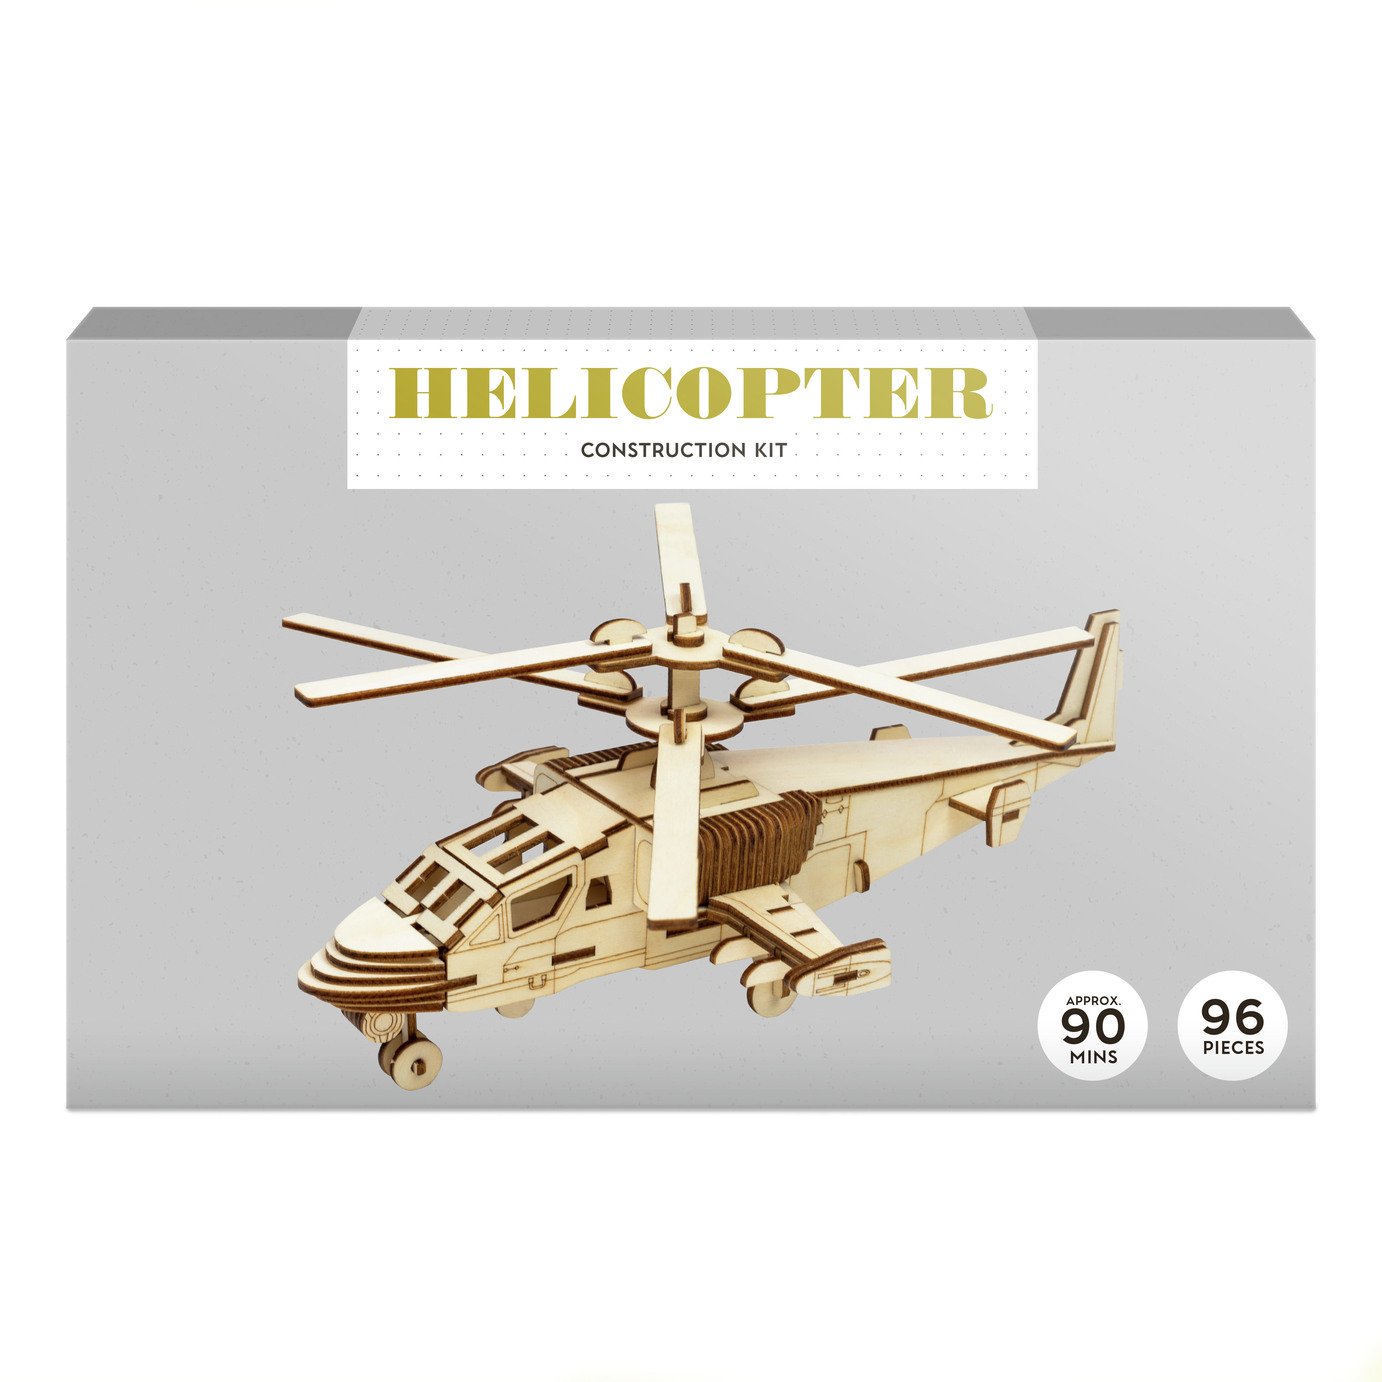 Helicopter Construction Kit Review